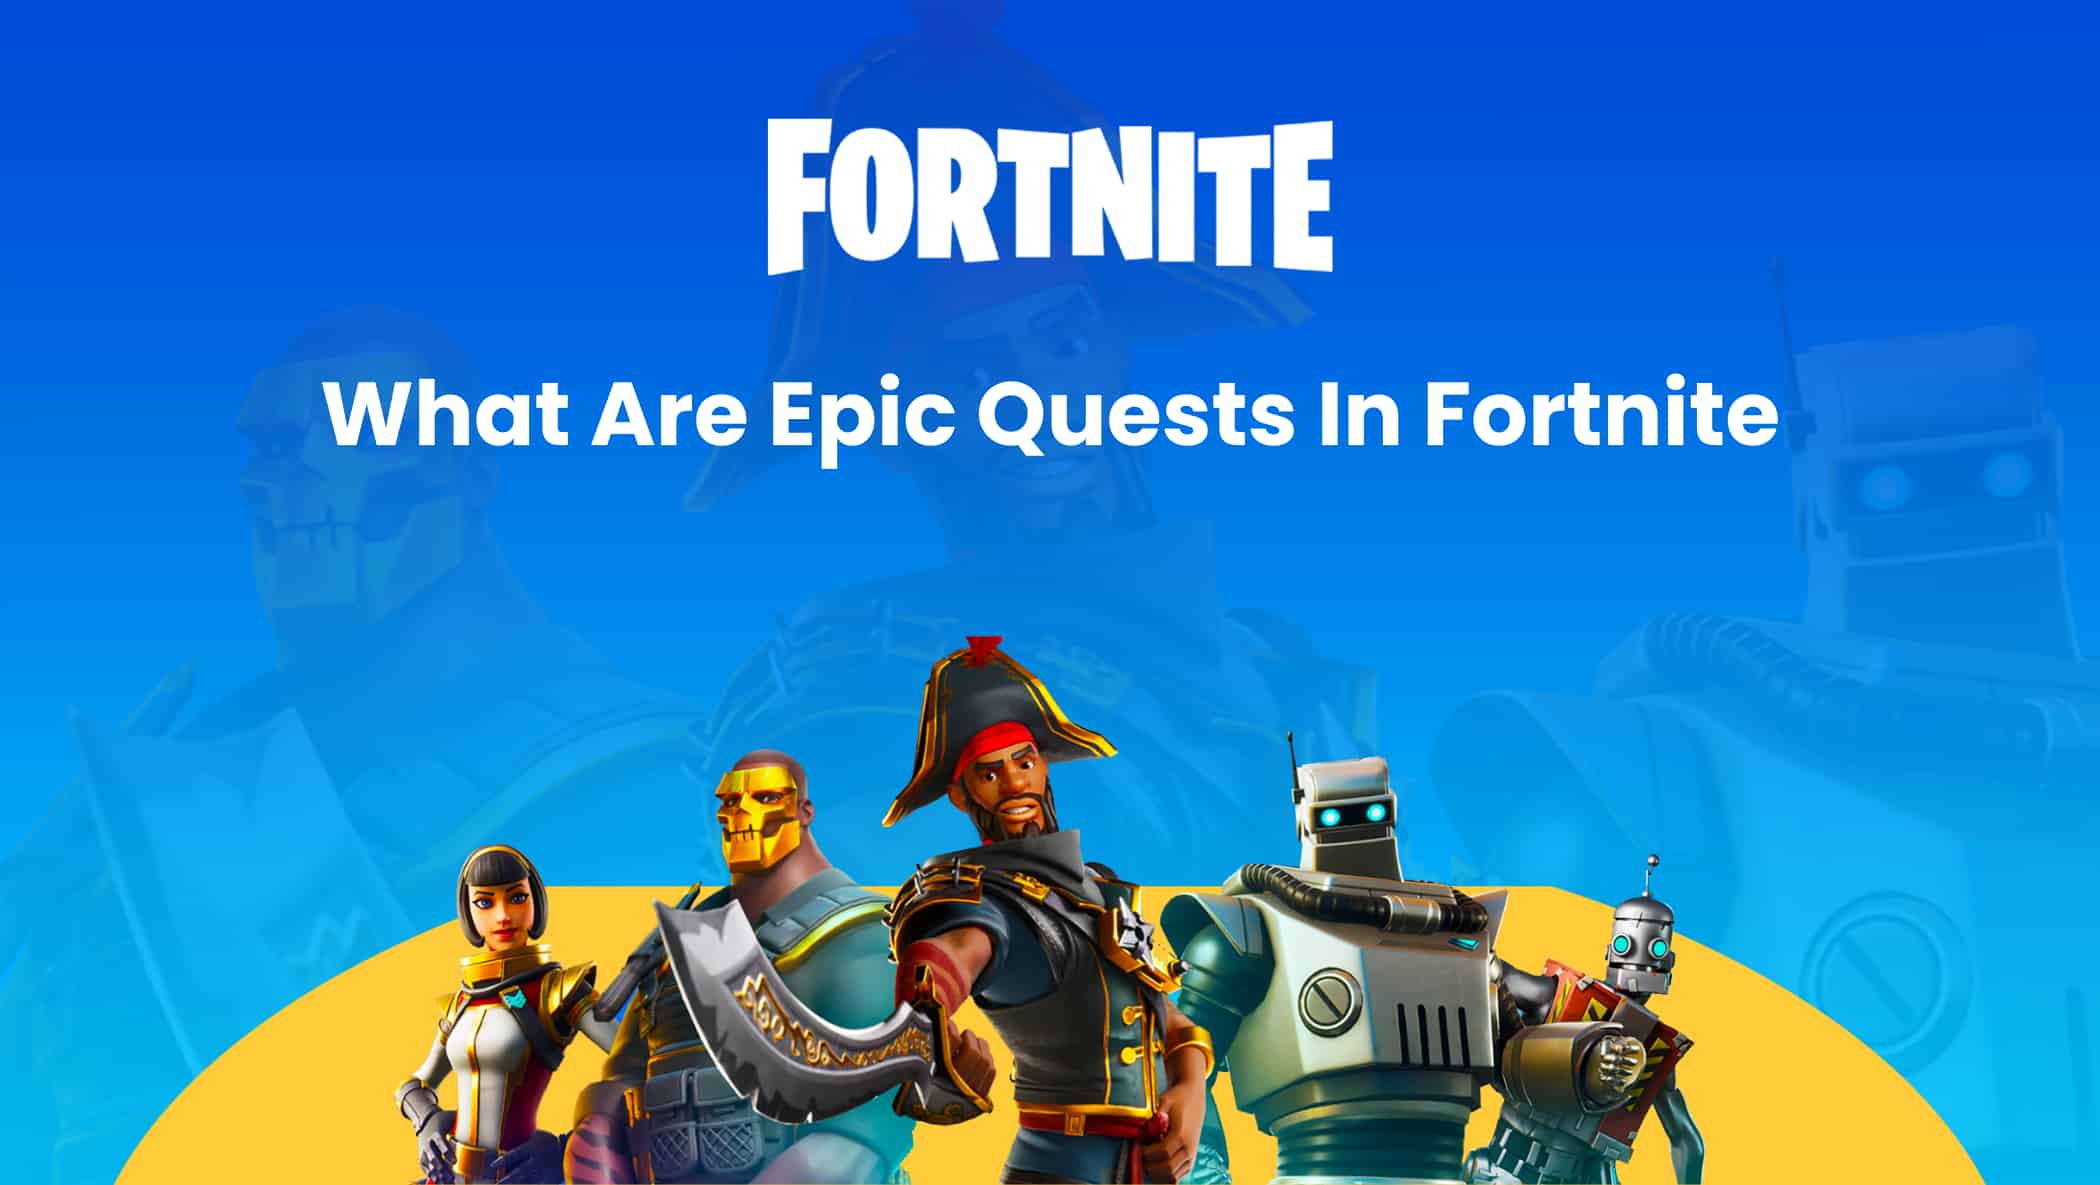 What Are Epic Quests In Fortnite